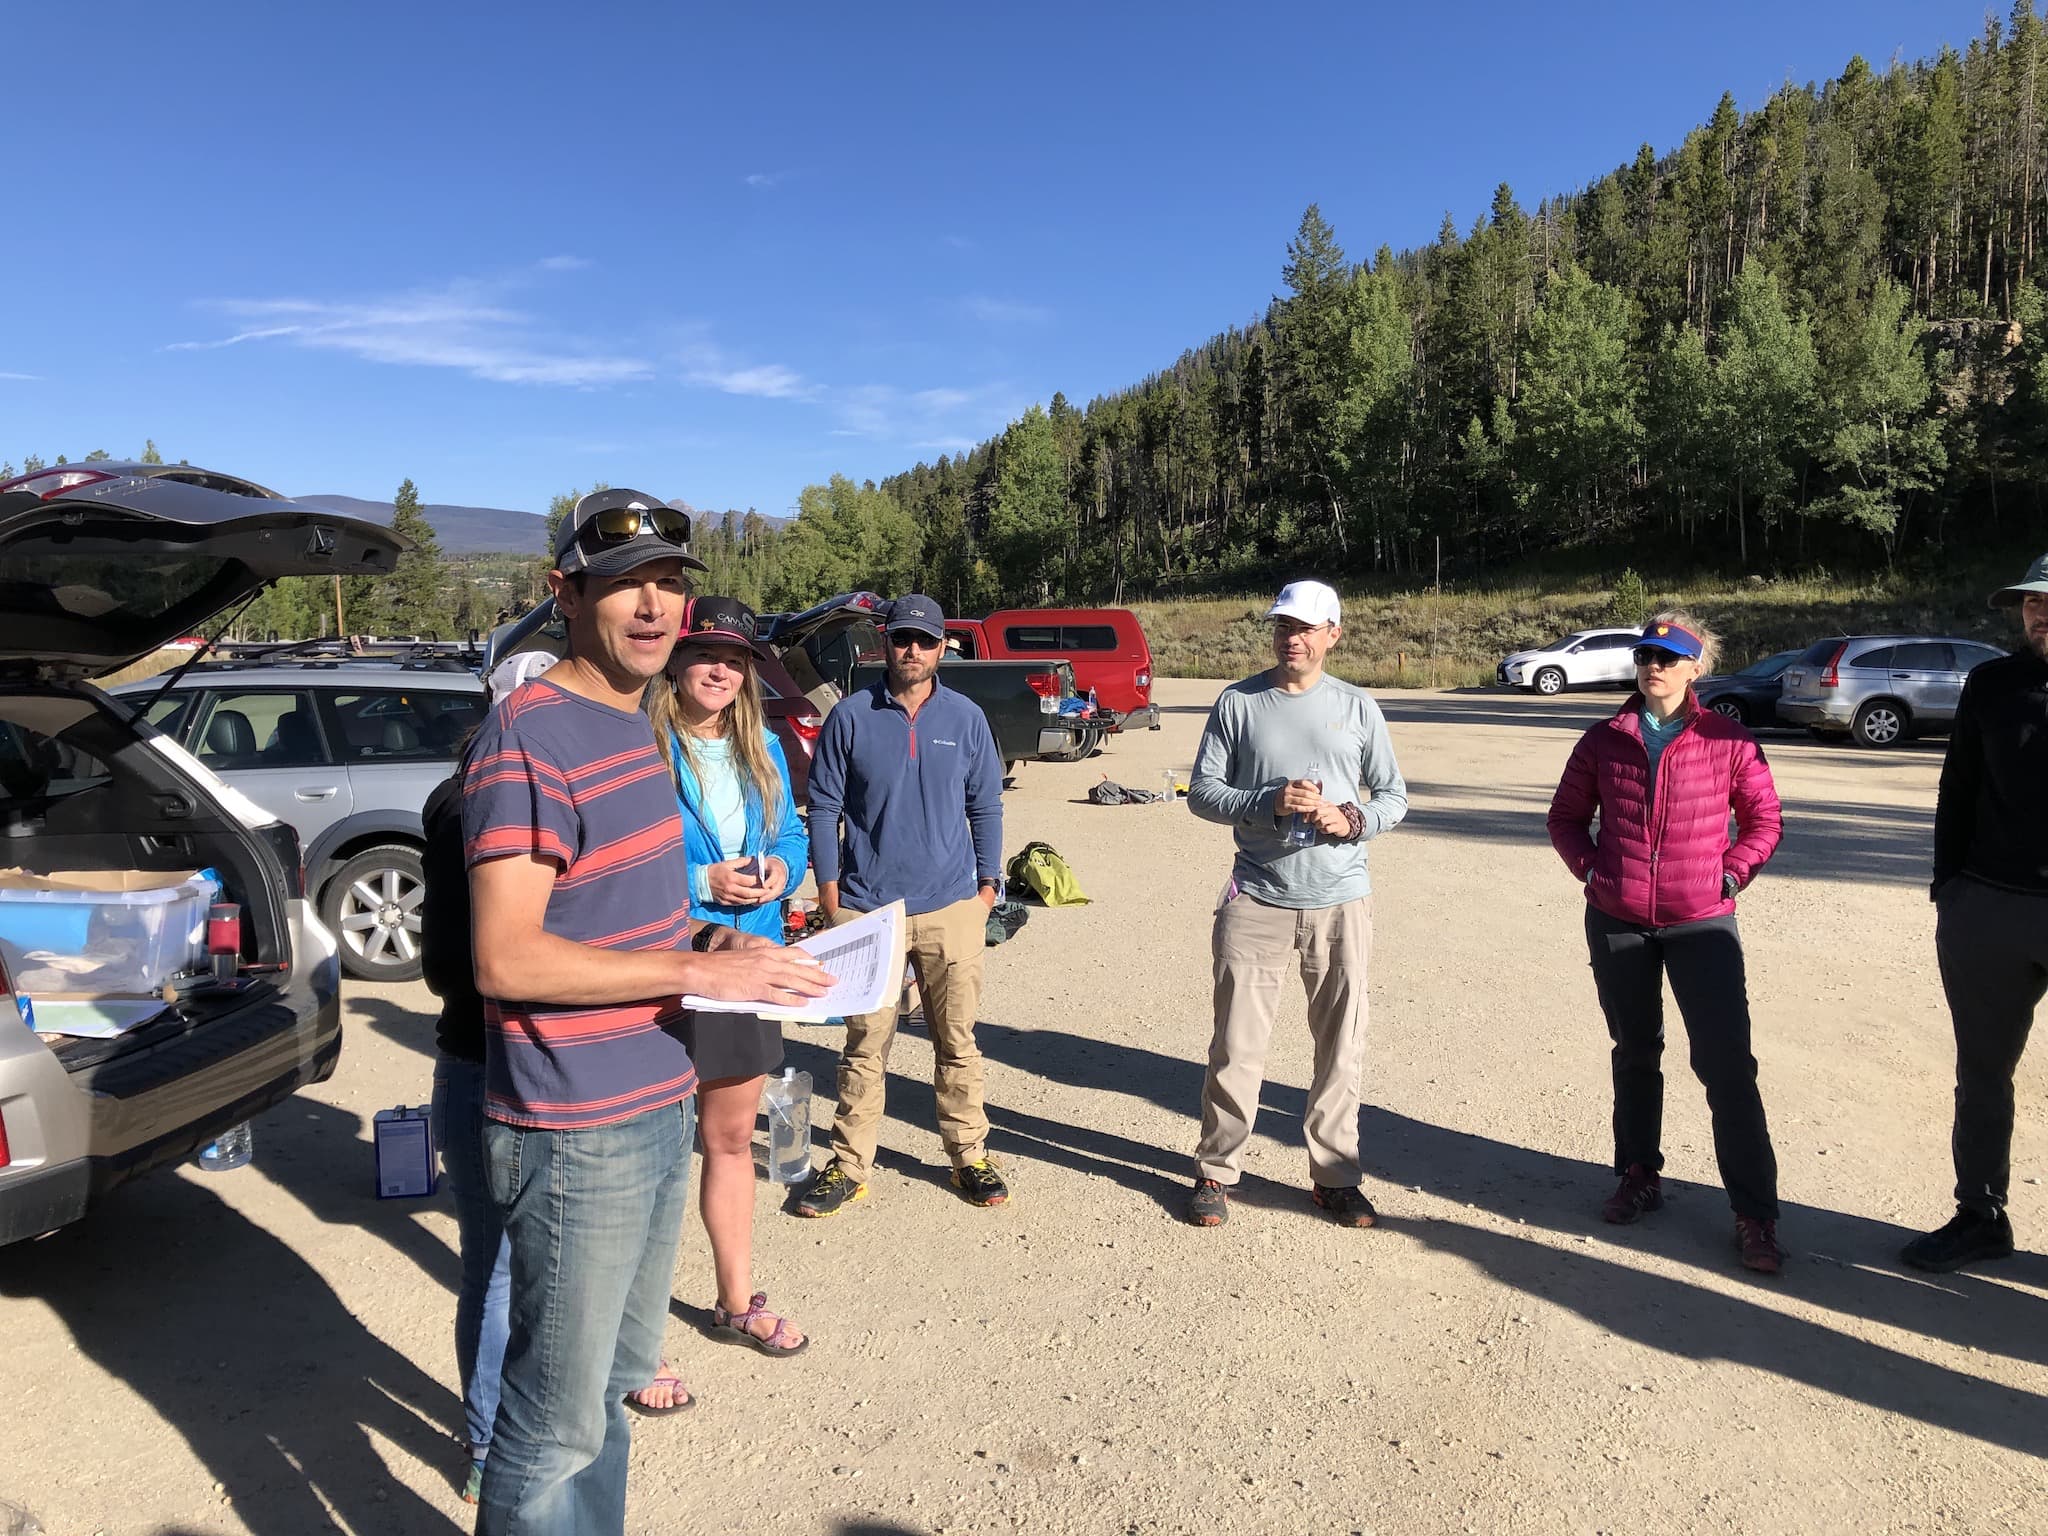 Andrew Skurka explaining the route through Rocky Mountain National Park to a group of hikers.